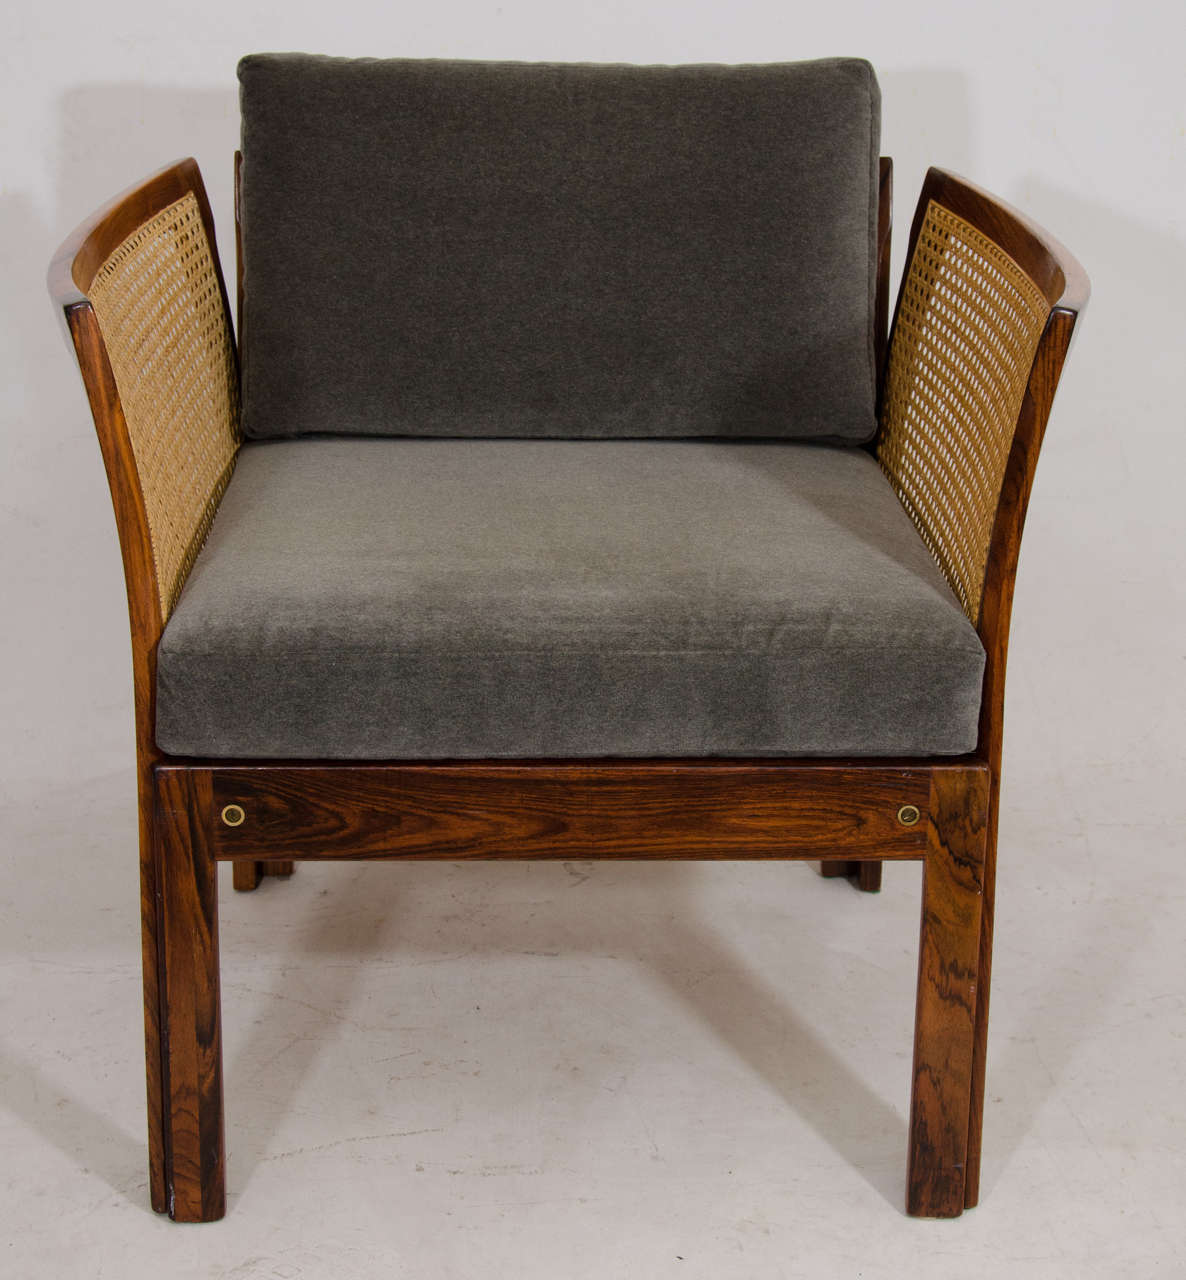 Beautiful pair of Danish chairs distinguished by gracefully curved side panels of caning framed in solid rosewood. This pair has cotton/mohair fabric cushions. Please contact for location.